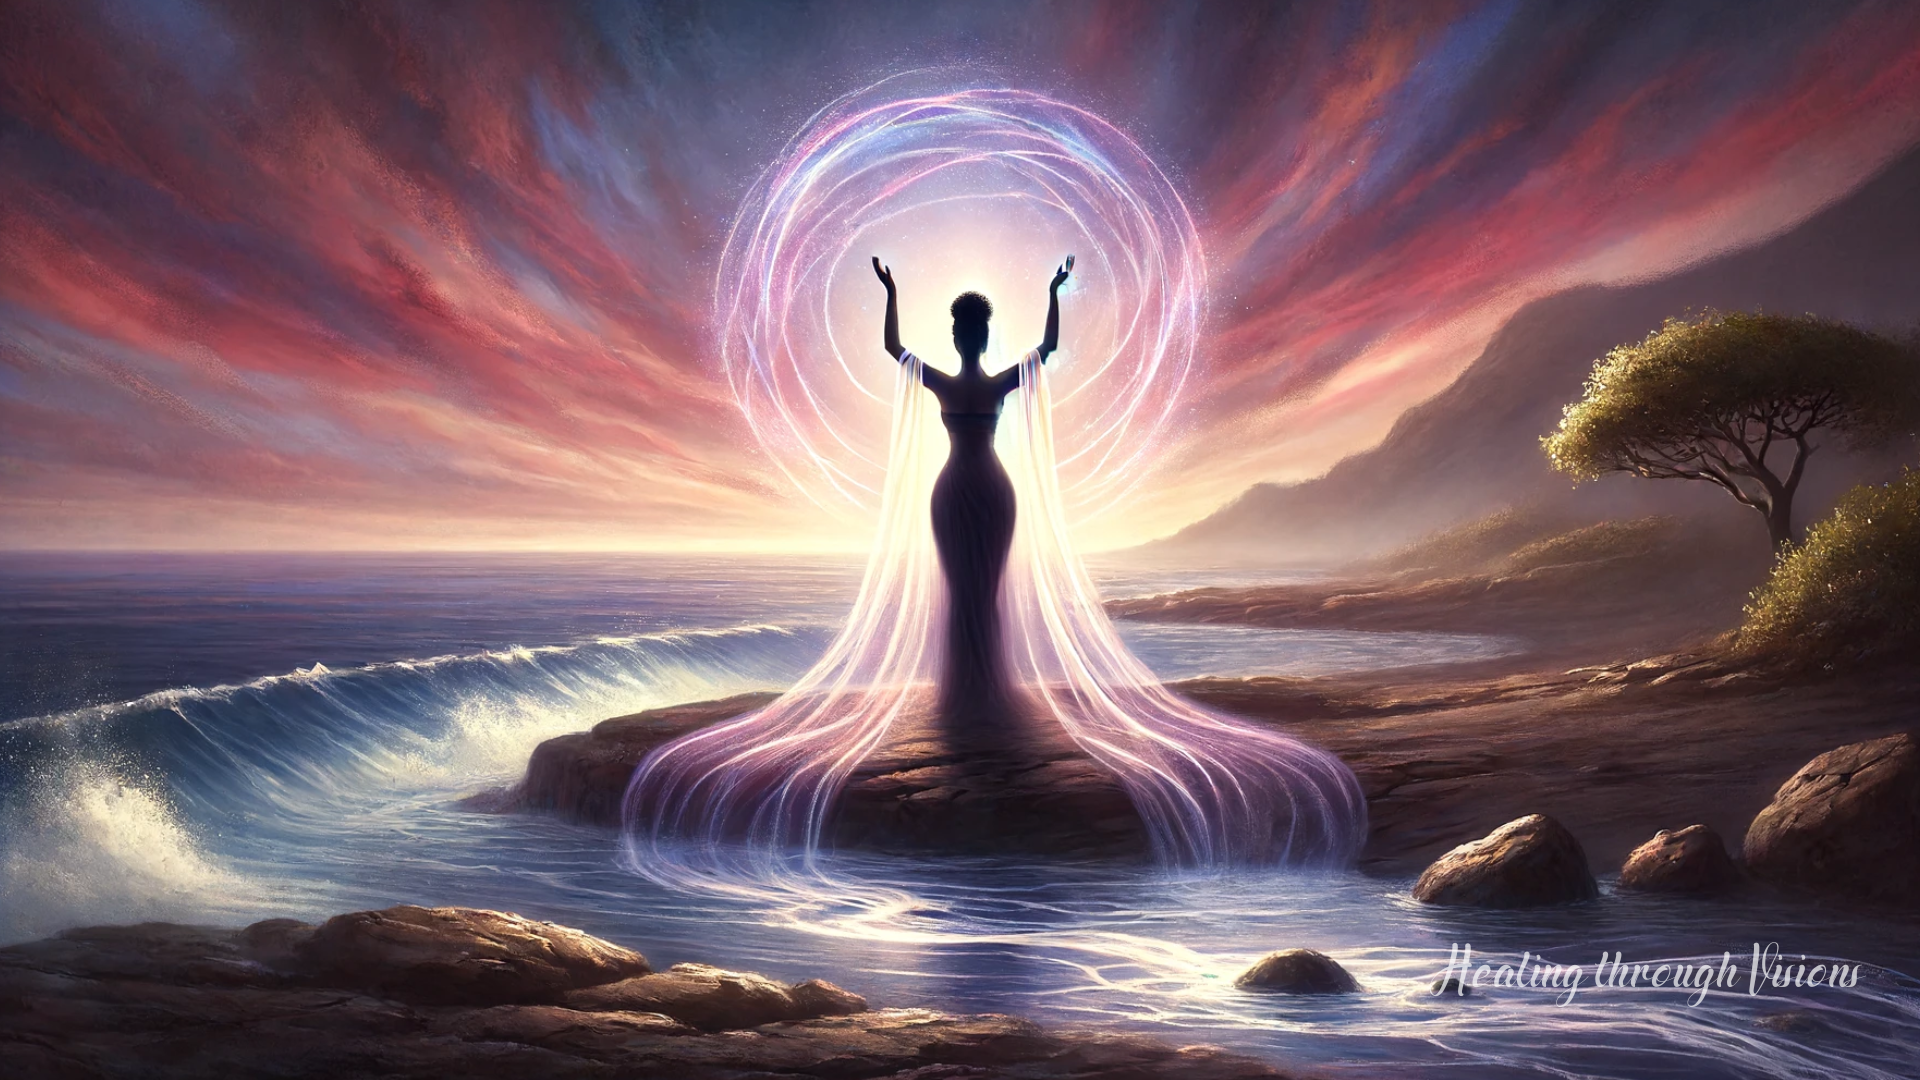 A serene, mystical scene of a Black woman standing on a rocky shore with a vast ocean behind her. Her arms are raised, and a soft, radiant light emanates from her hands, flowing into the water. The sky is painted with hues of twilight, blending deep purples, pinks, and oranges, symbolizing the healing energy of Ho'oponopono.